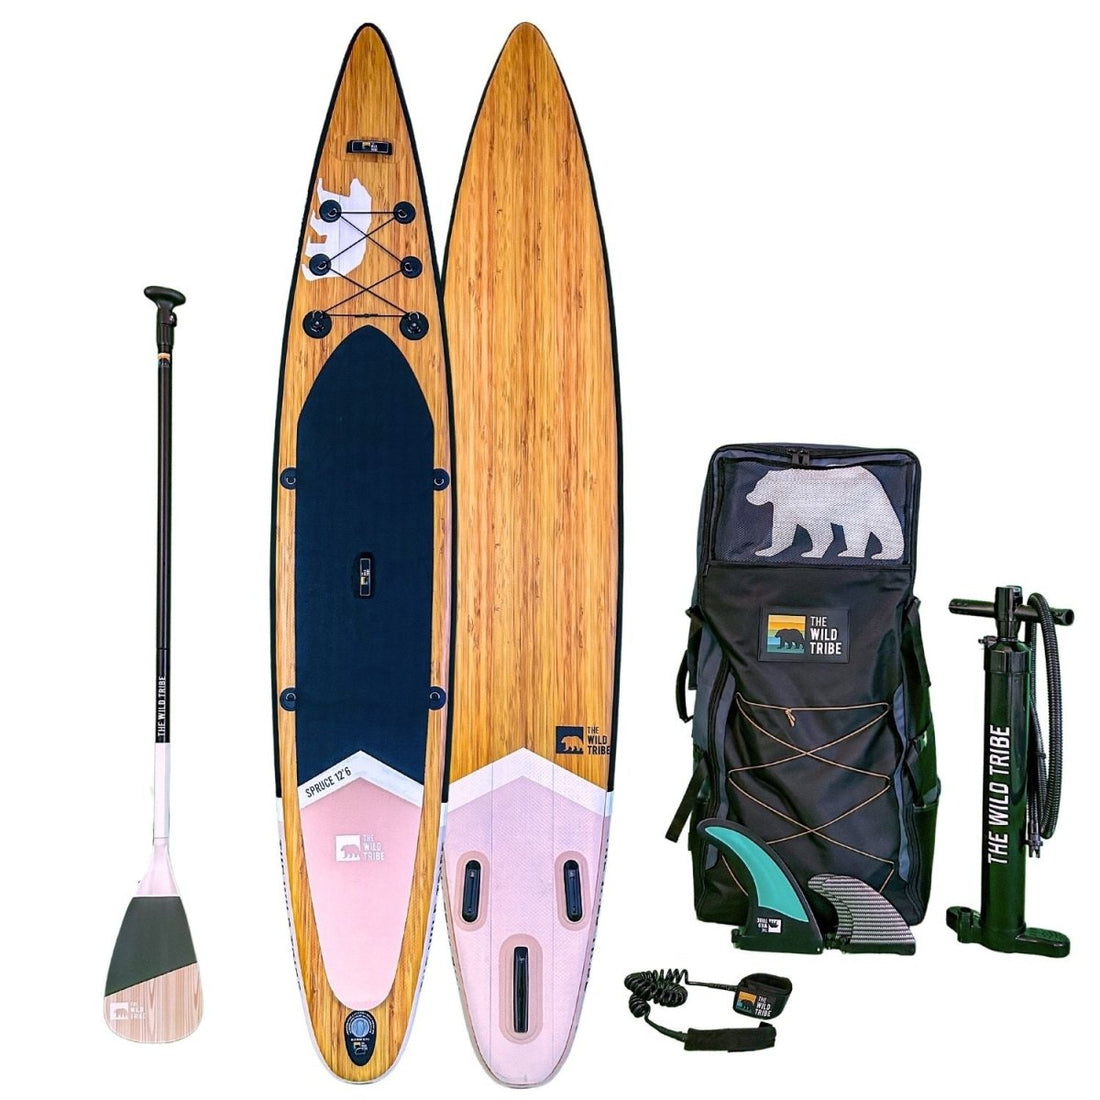 Spruce 12'6" Saumon: Paddleboard Gonflable 12'6" Touring Haut de Gamme - Quebec SUP